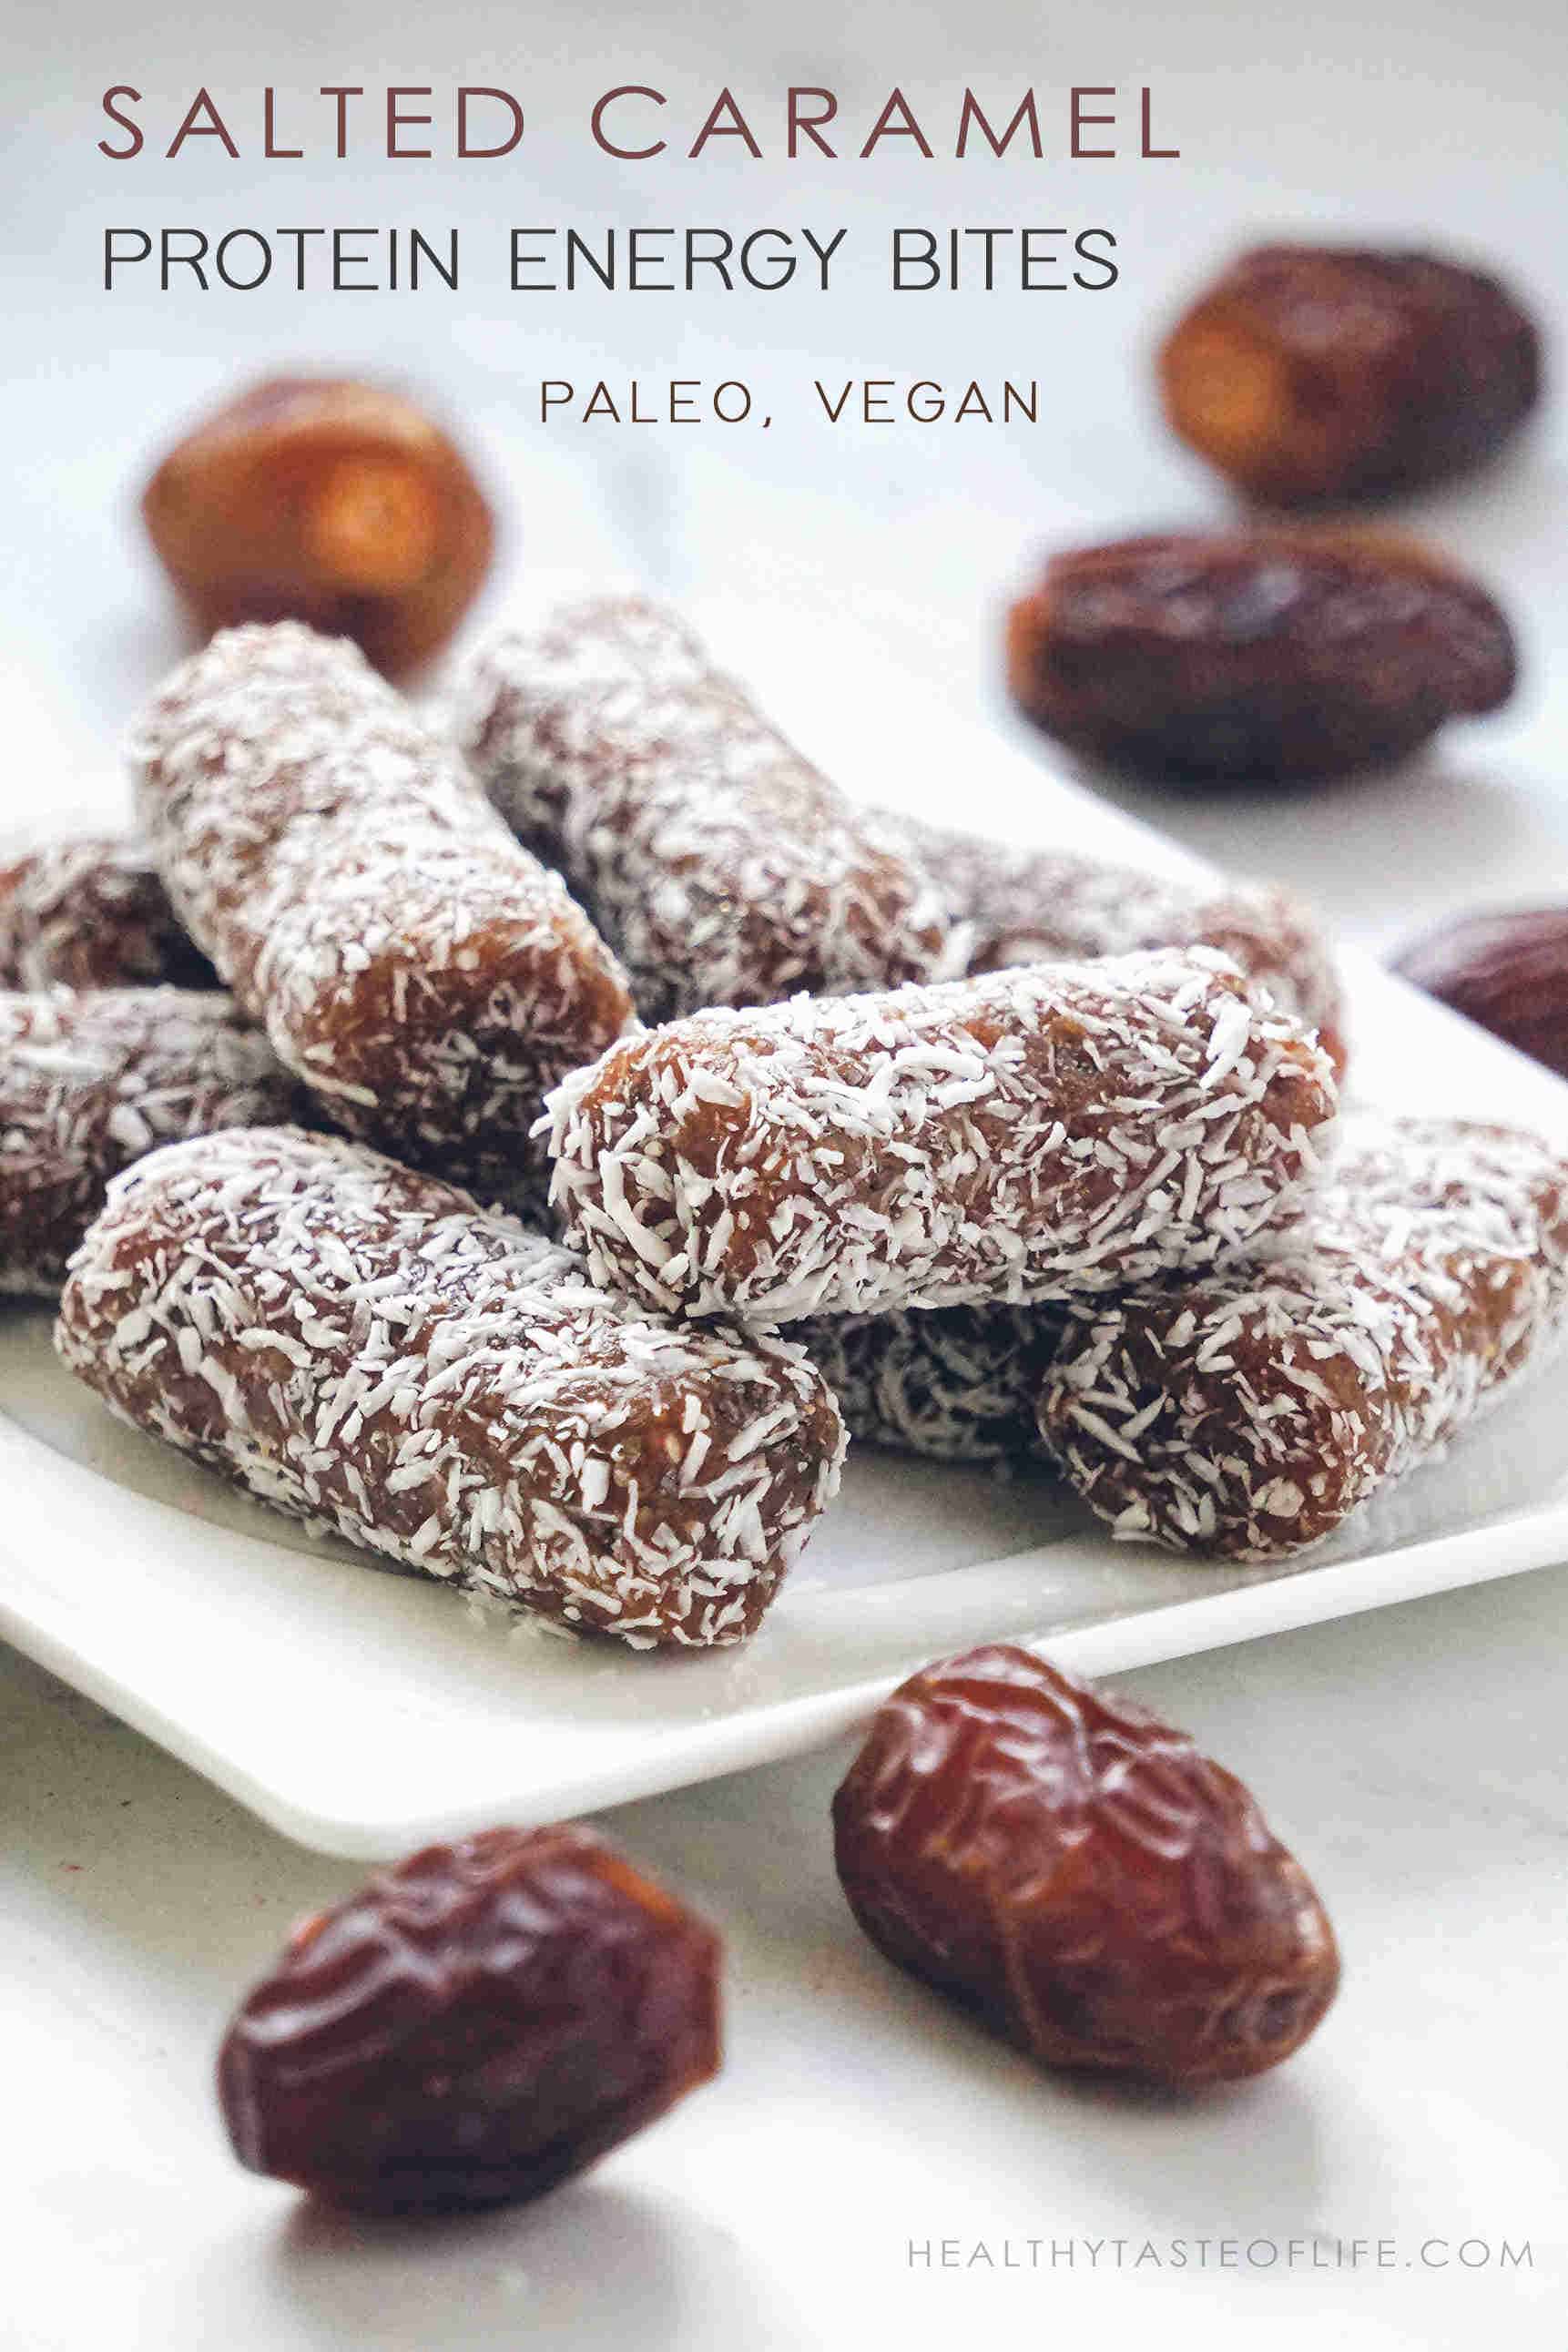 Healthy Salted Caramel Coconut Date Rolls (Raw Vegan, Paleo) - a no bake, raw vegan, paleo snack or a quick breakfast you can have on the go. These coconut date rolls make perfect salted caramel protein energy bites or power bites without processed sugar. Filled with lots of fiber, good carbs, protein and healthy fats.